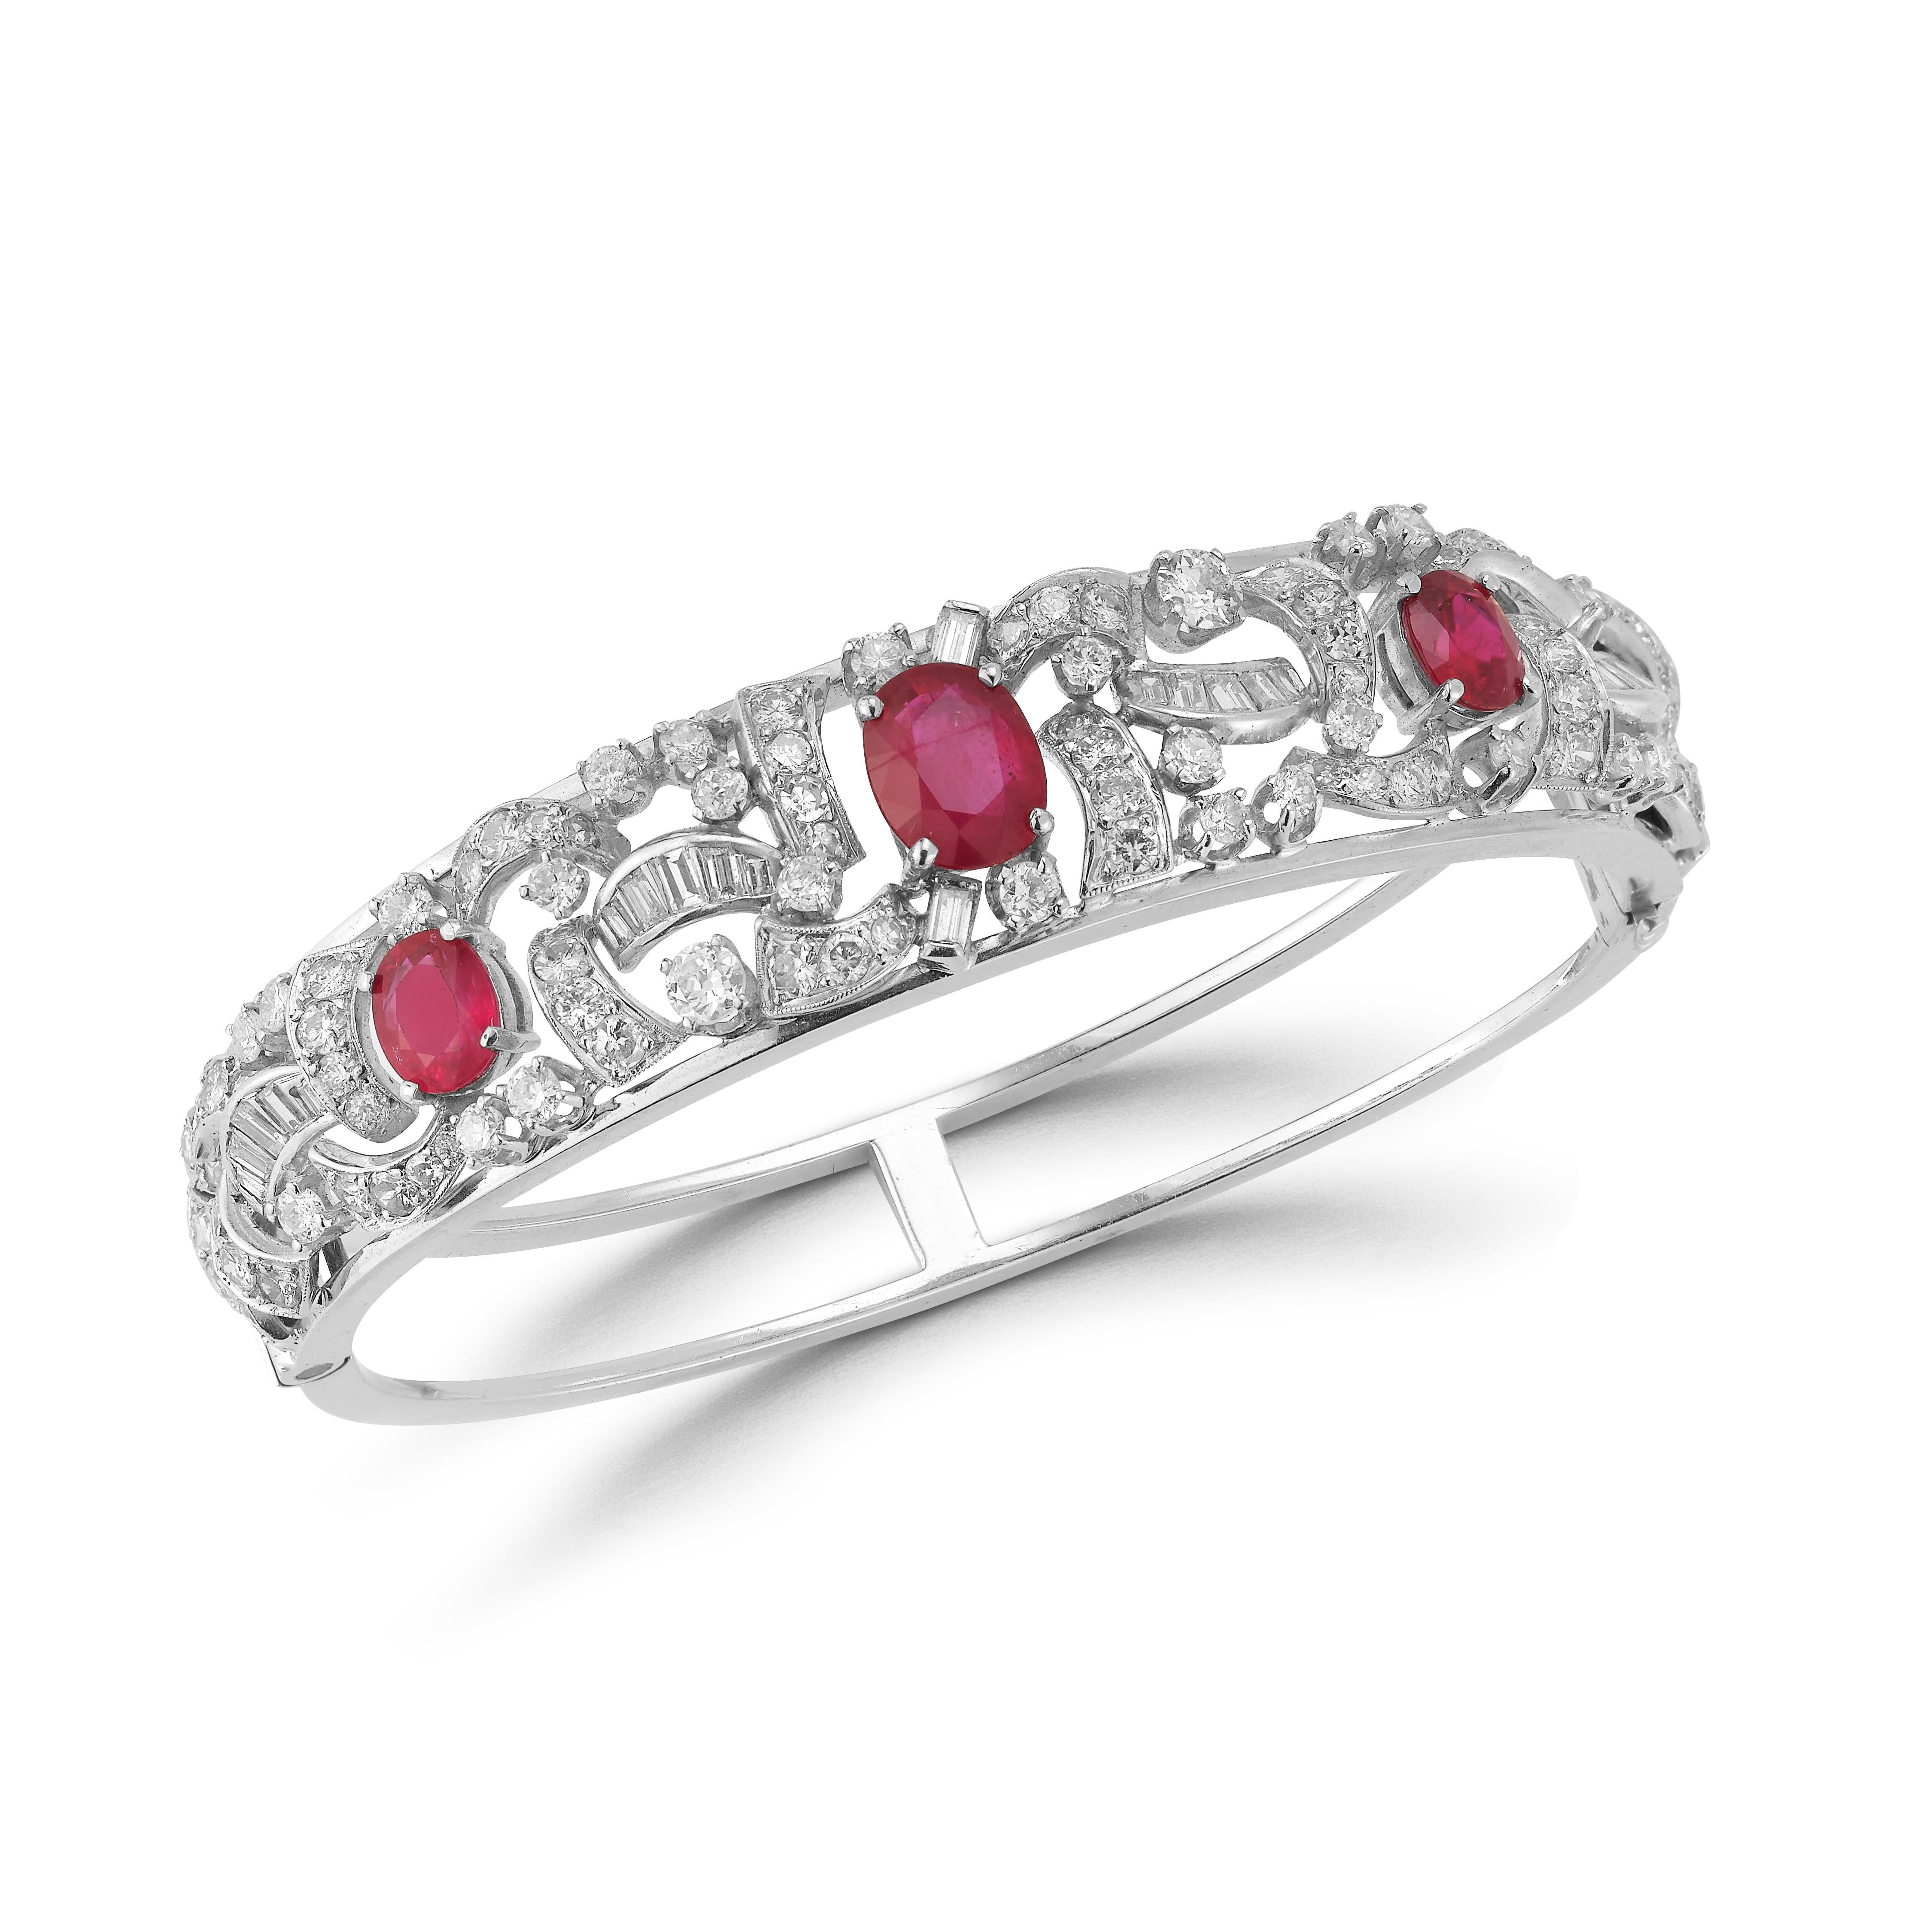 Oval Cut Ruby & Diamond Bangle Bracelet 3 oval cut rubies surrounded by round & baguette cut diamonds set in 14k white gold.

Ruby Weight: 5.26 cts 
Diamond Weight: 4.45 cts 

Measurements: 2.25